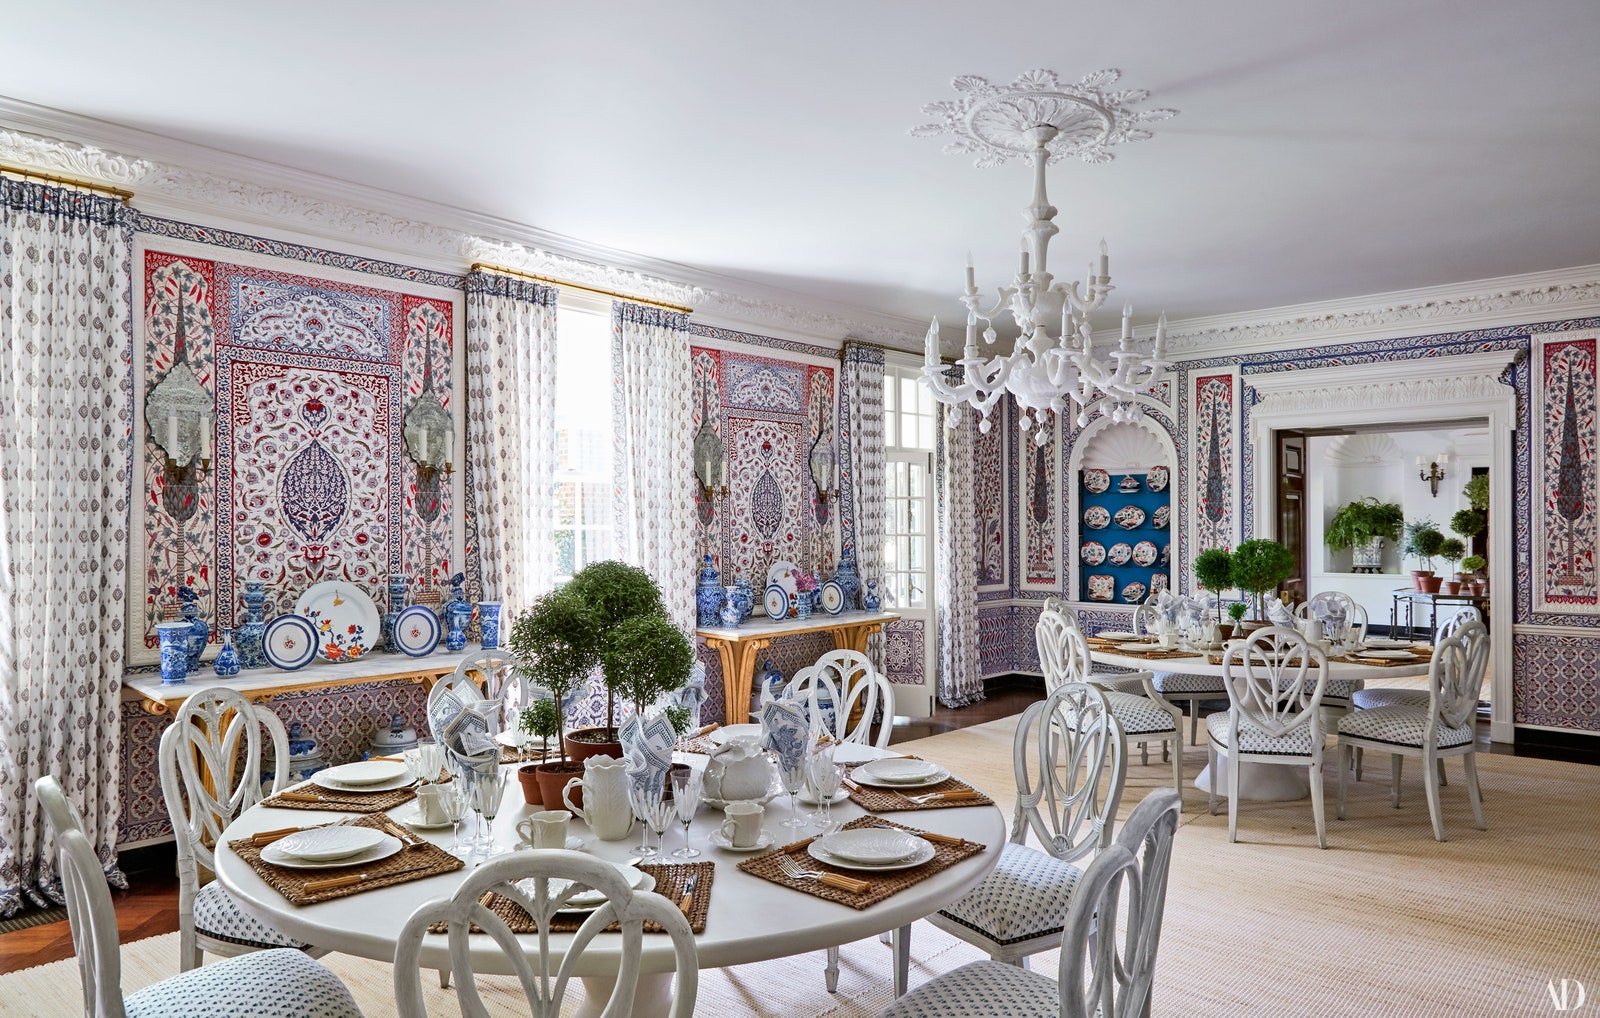 Décor Inspiration | At Home With: Tory Burch, Southampton